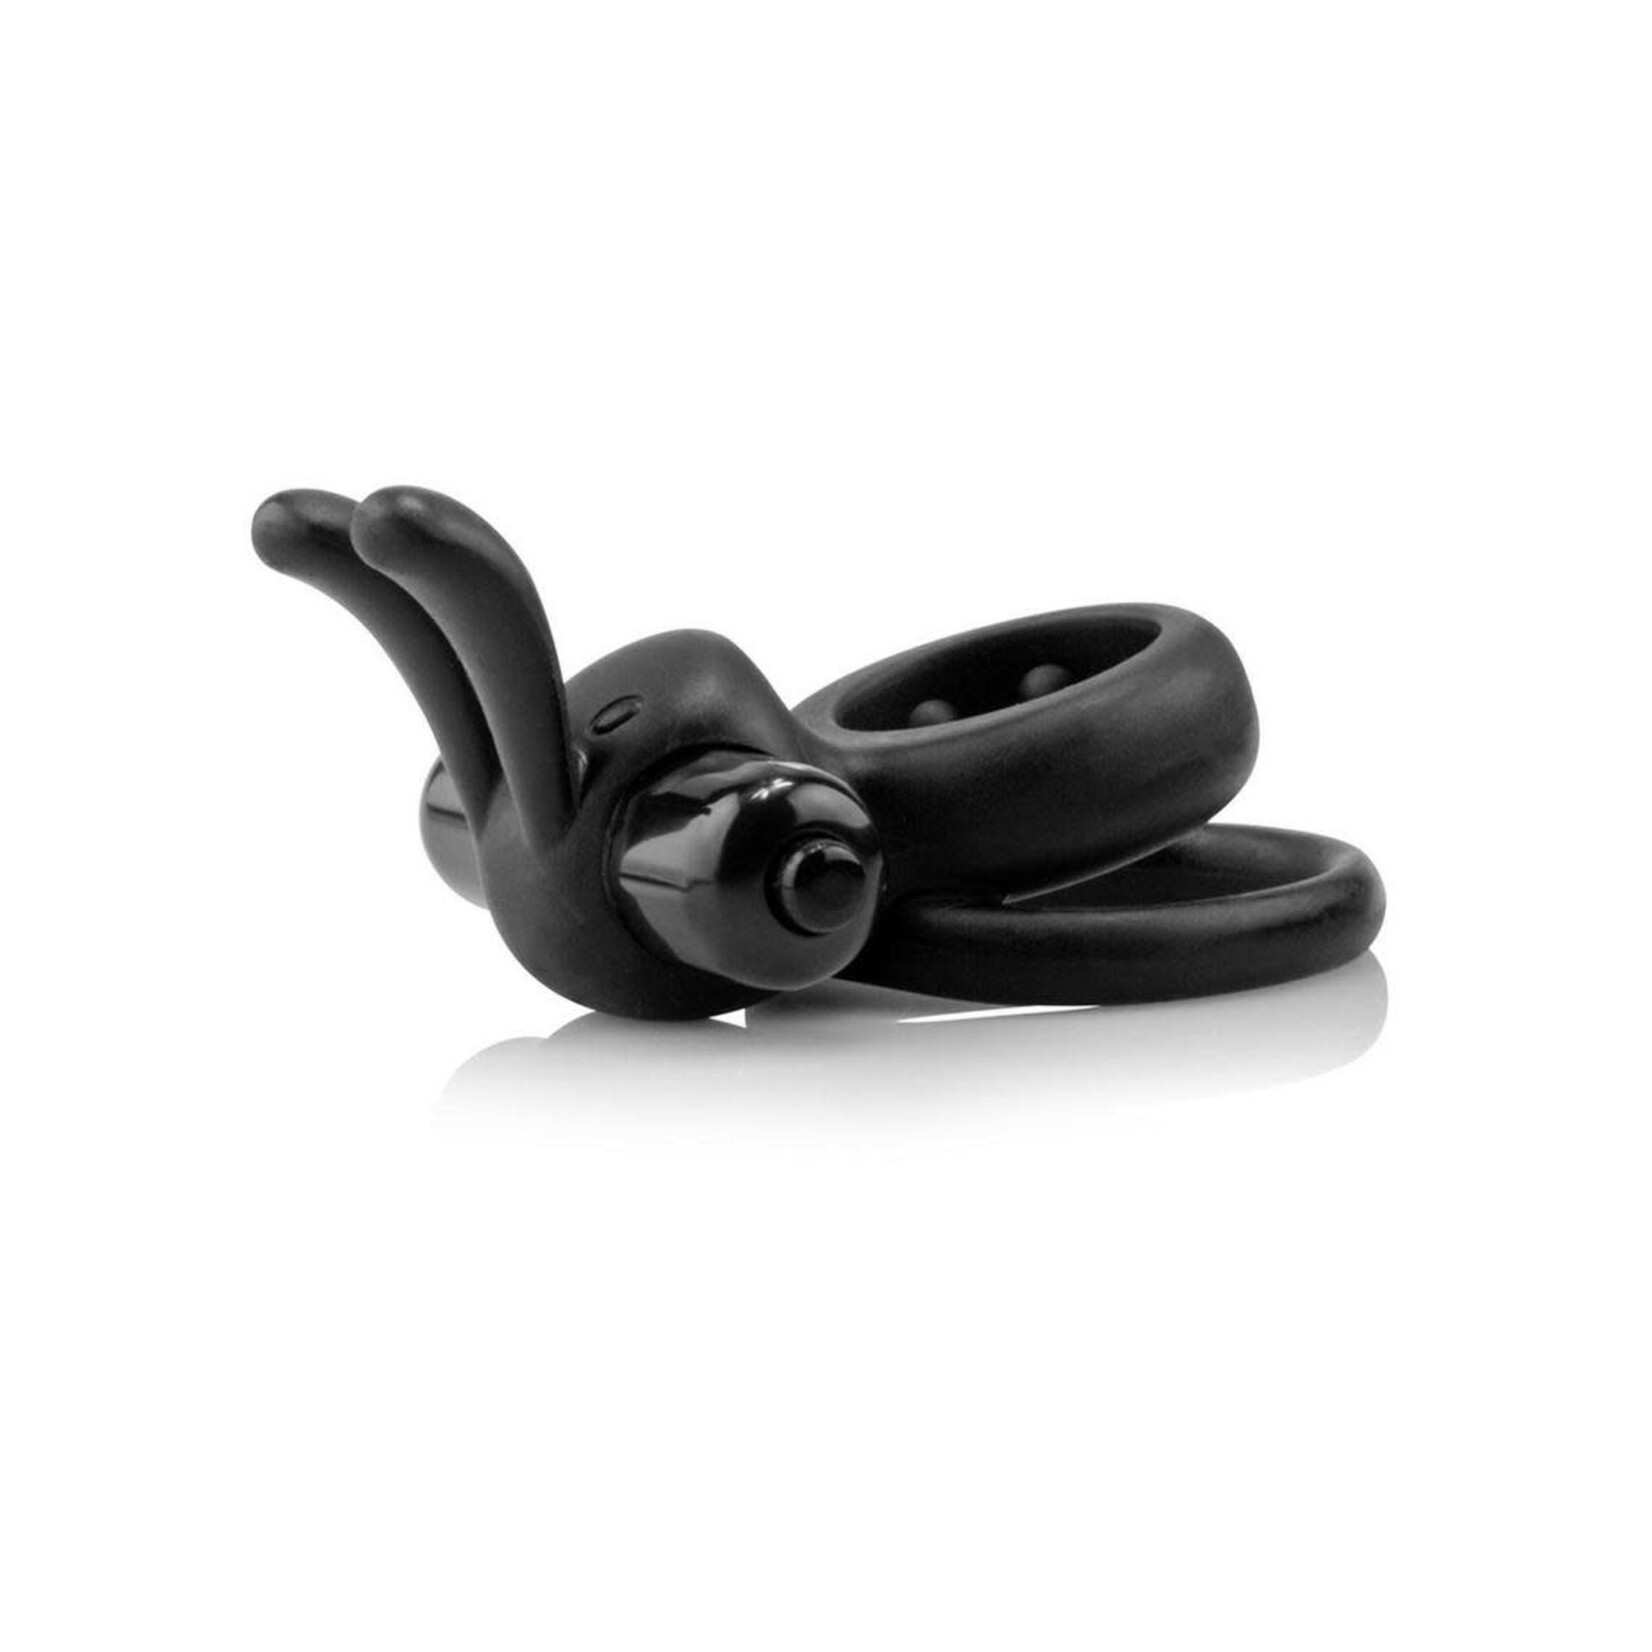 Ohare Silicone Vibrating Rabbit Cockring Waterproof Black